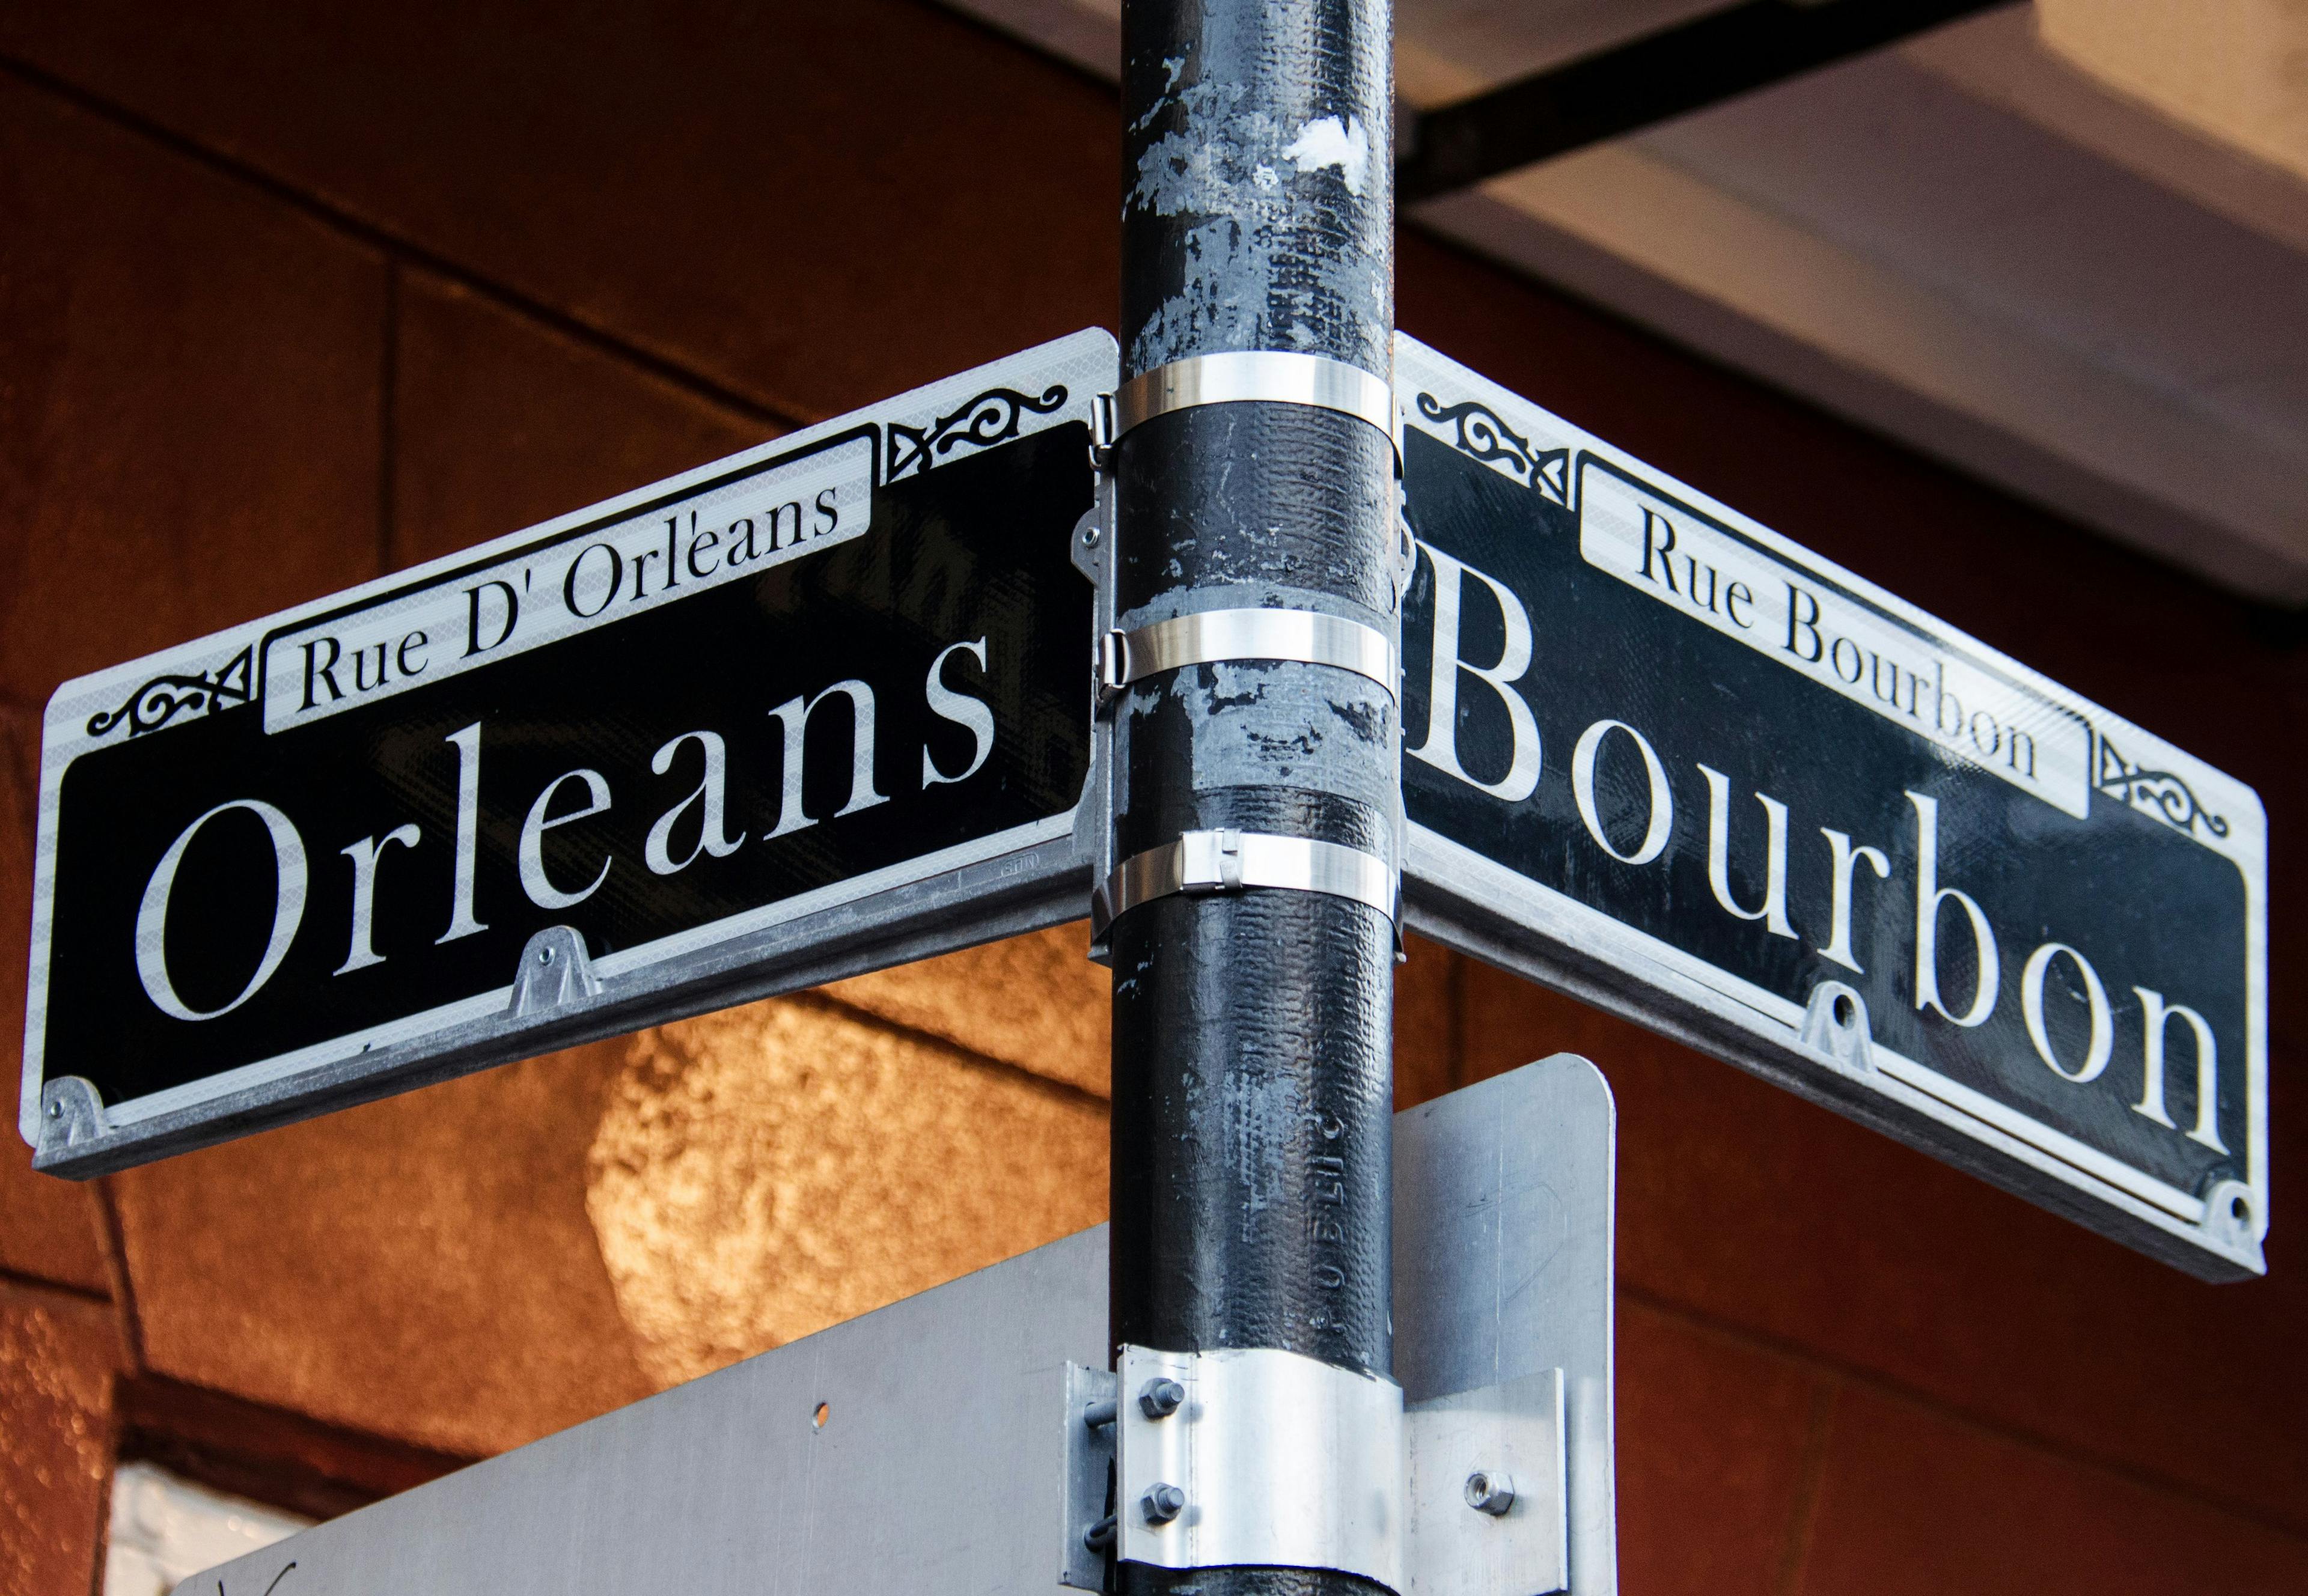 Plan Your Trip: What to do While Visiting NOLA